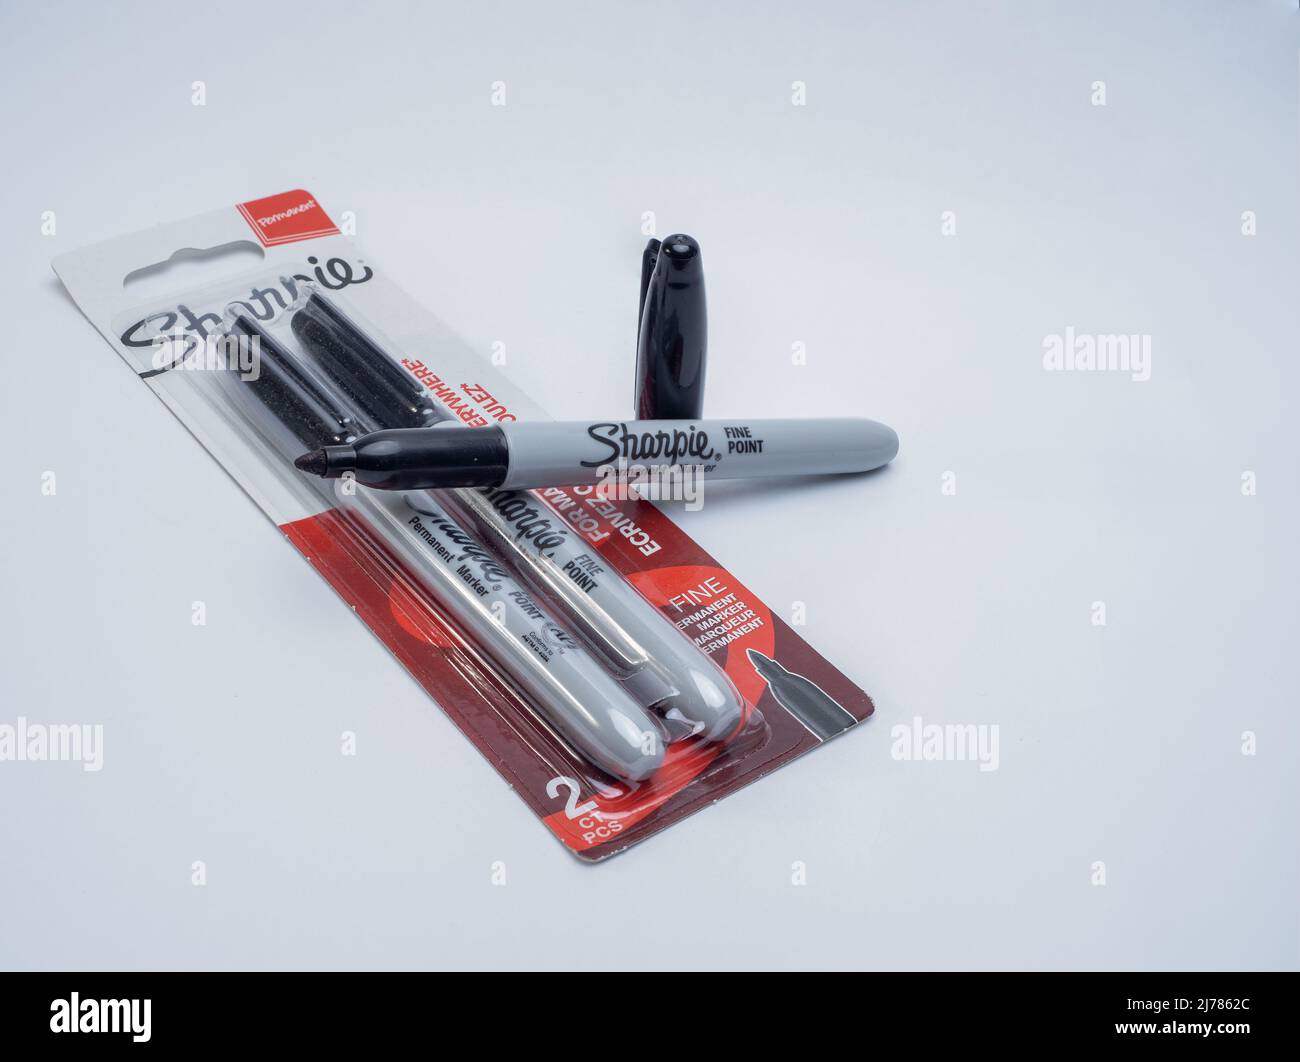 Black Sharpie Pen High Resolution Stock Photography and Images - Alamy